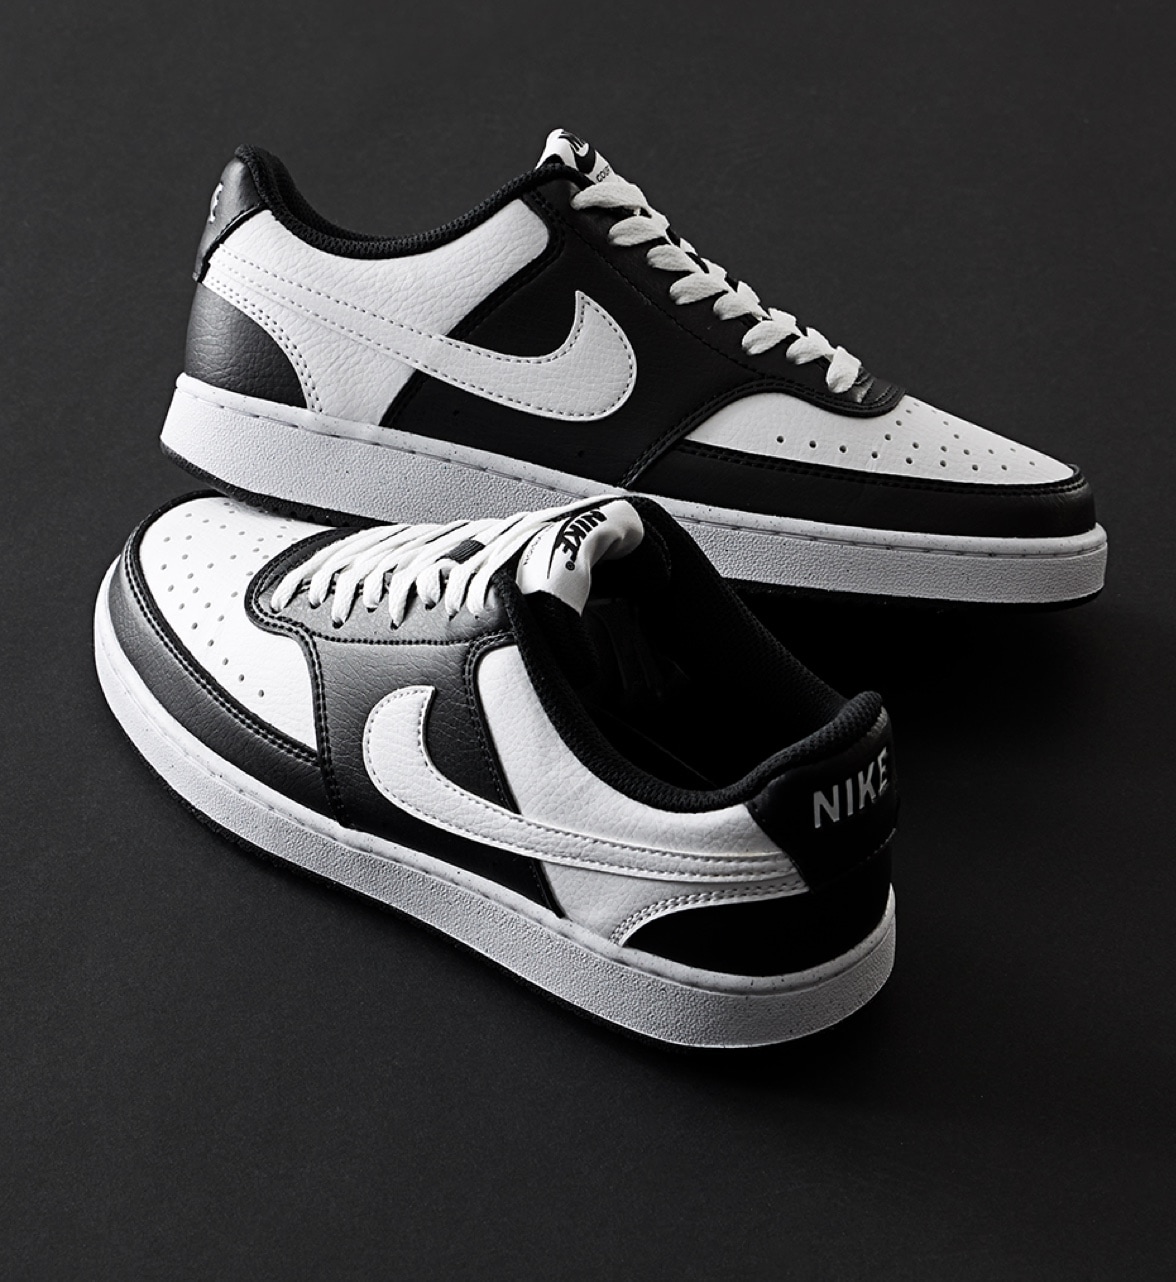 black and white panda nike court sneakers stacked on black background